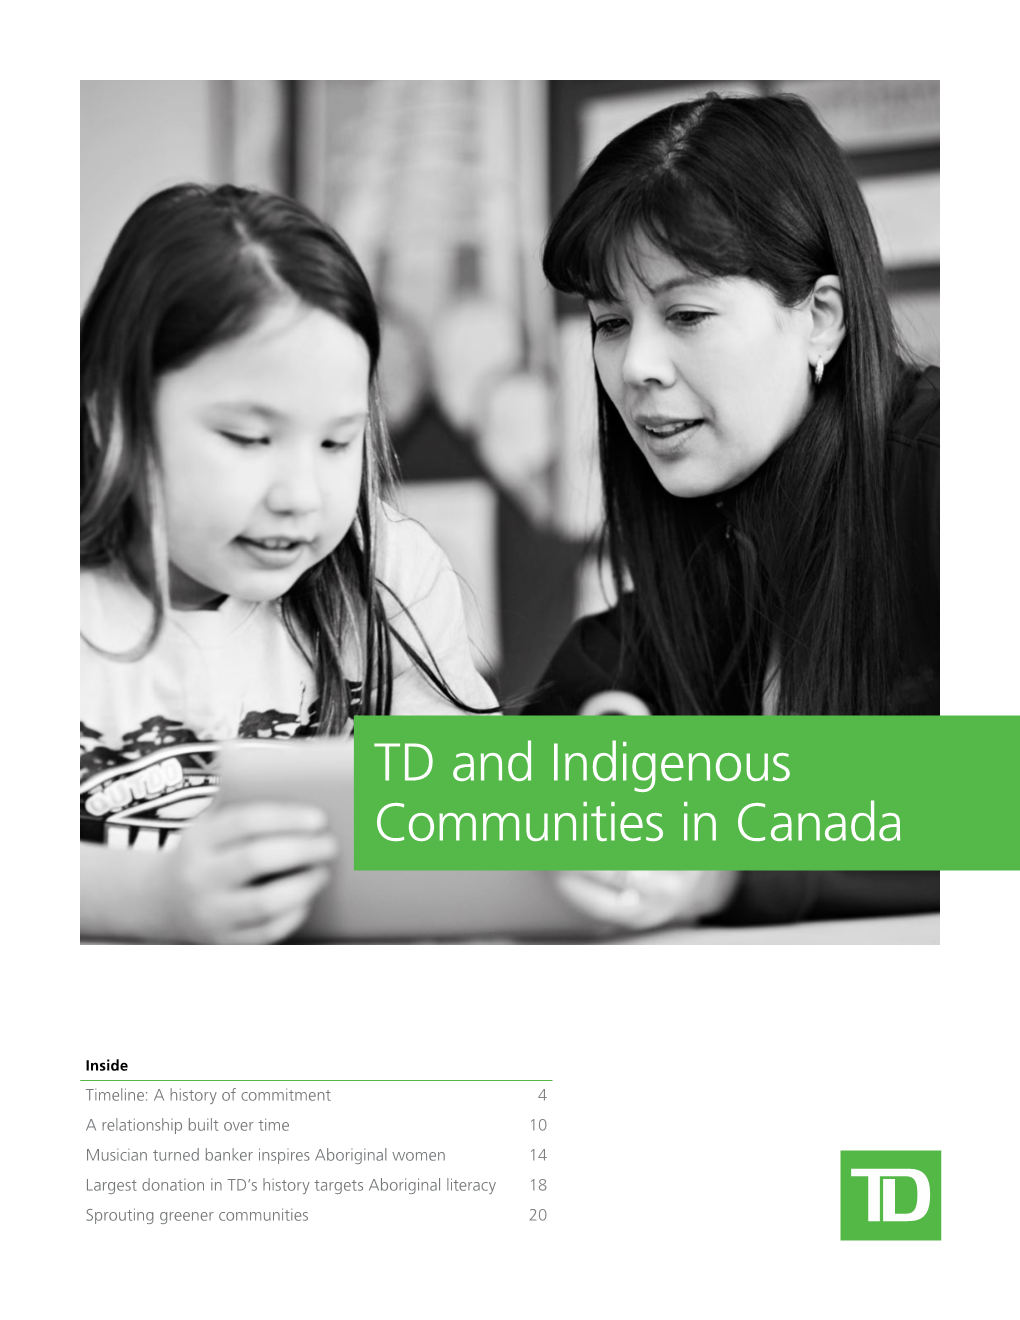 TD and Indigenous Communities in Canada